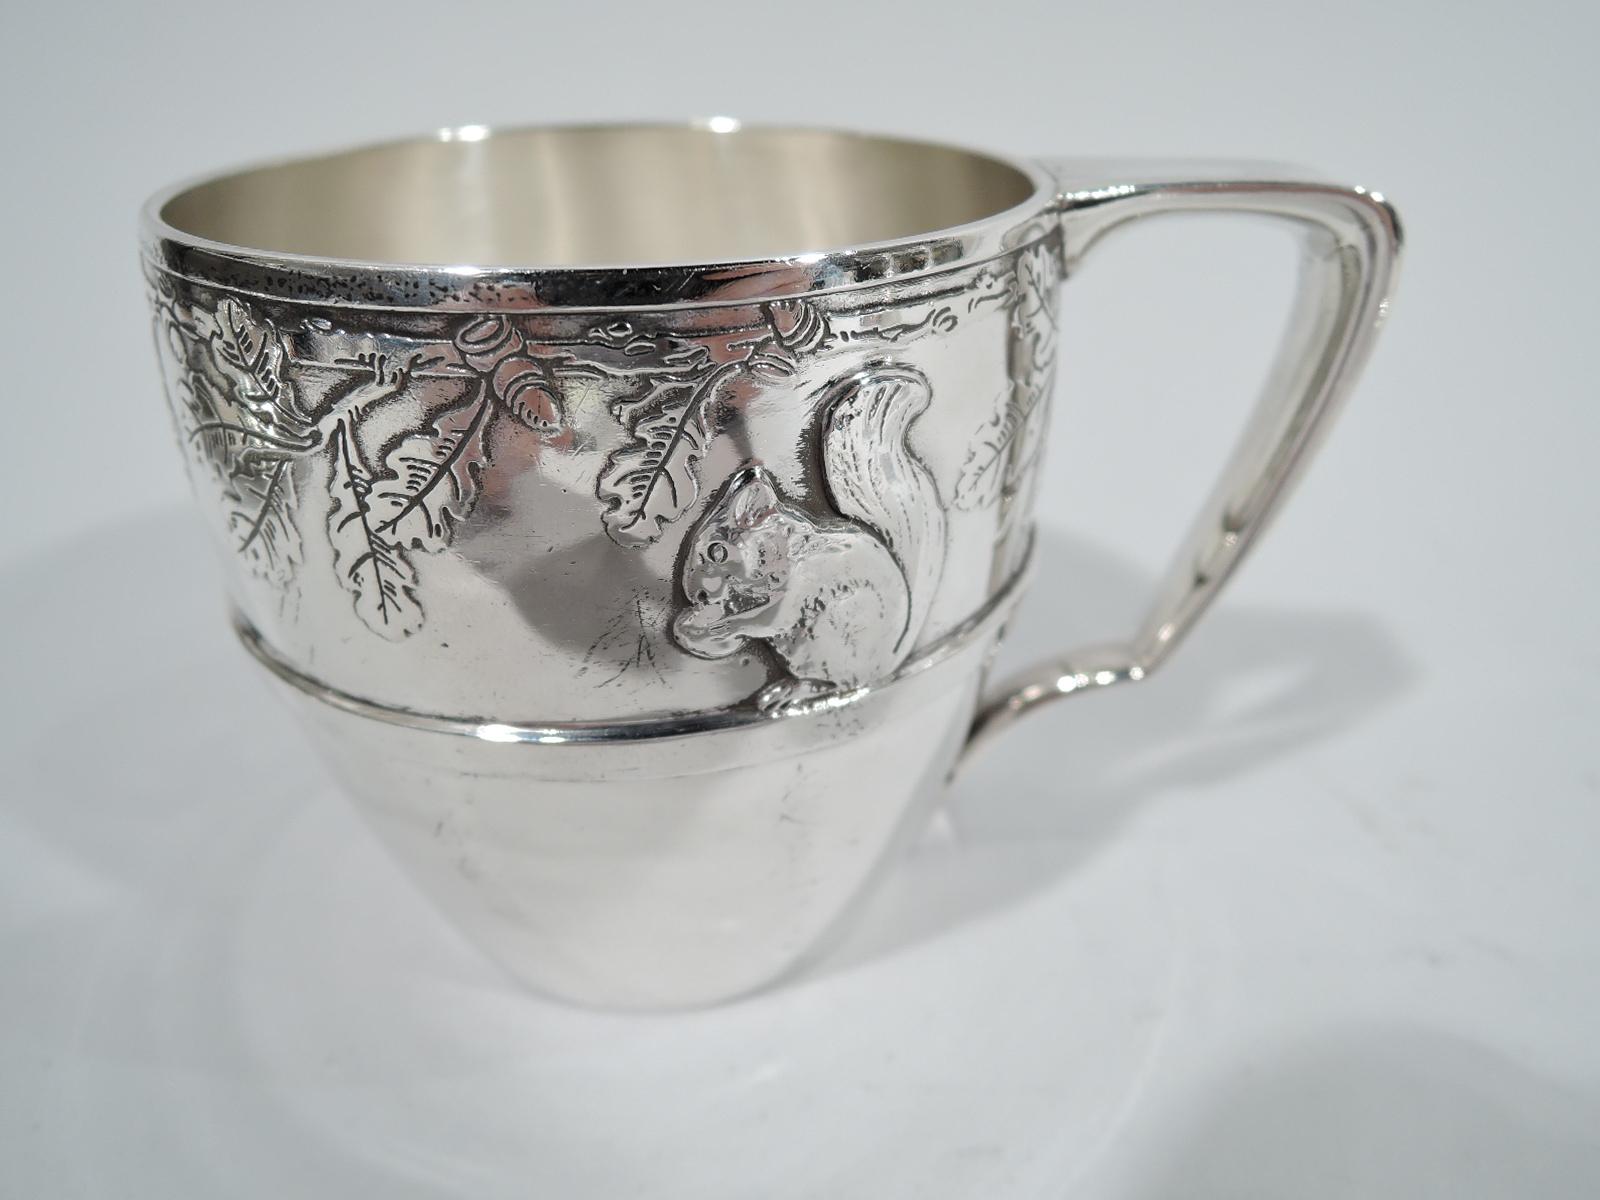 Art Deco sterling silver baby set. Made by Tiffany & Co. in New York, circa 1927. This set comprises 9 pieces: cup, bowl, plate, napkin ring, knife, 2 spoons, fork, and food pusher. Each piece has acid-etched frieze with alternating oak leaves and